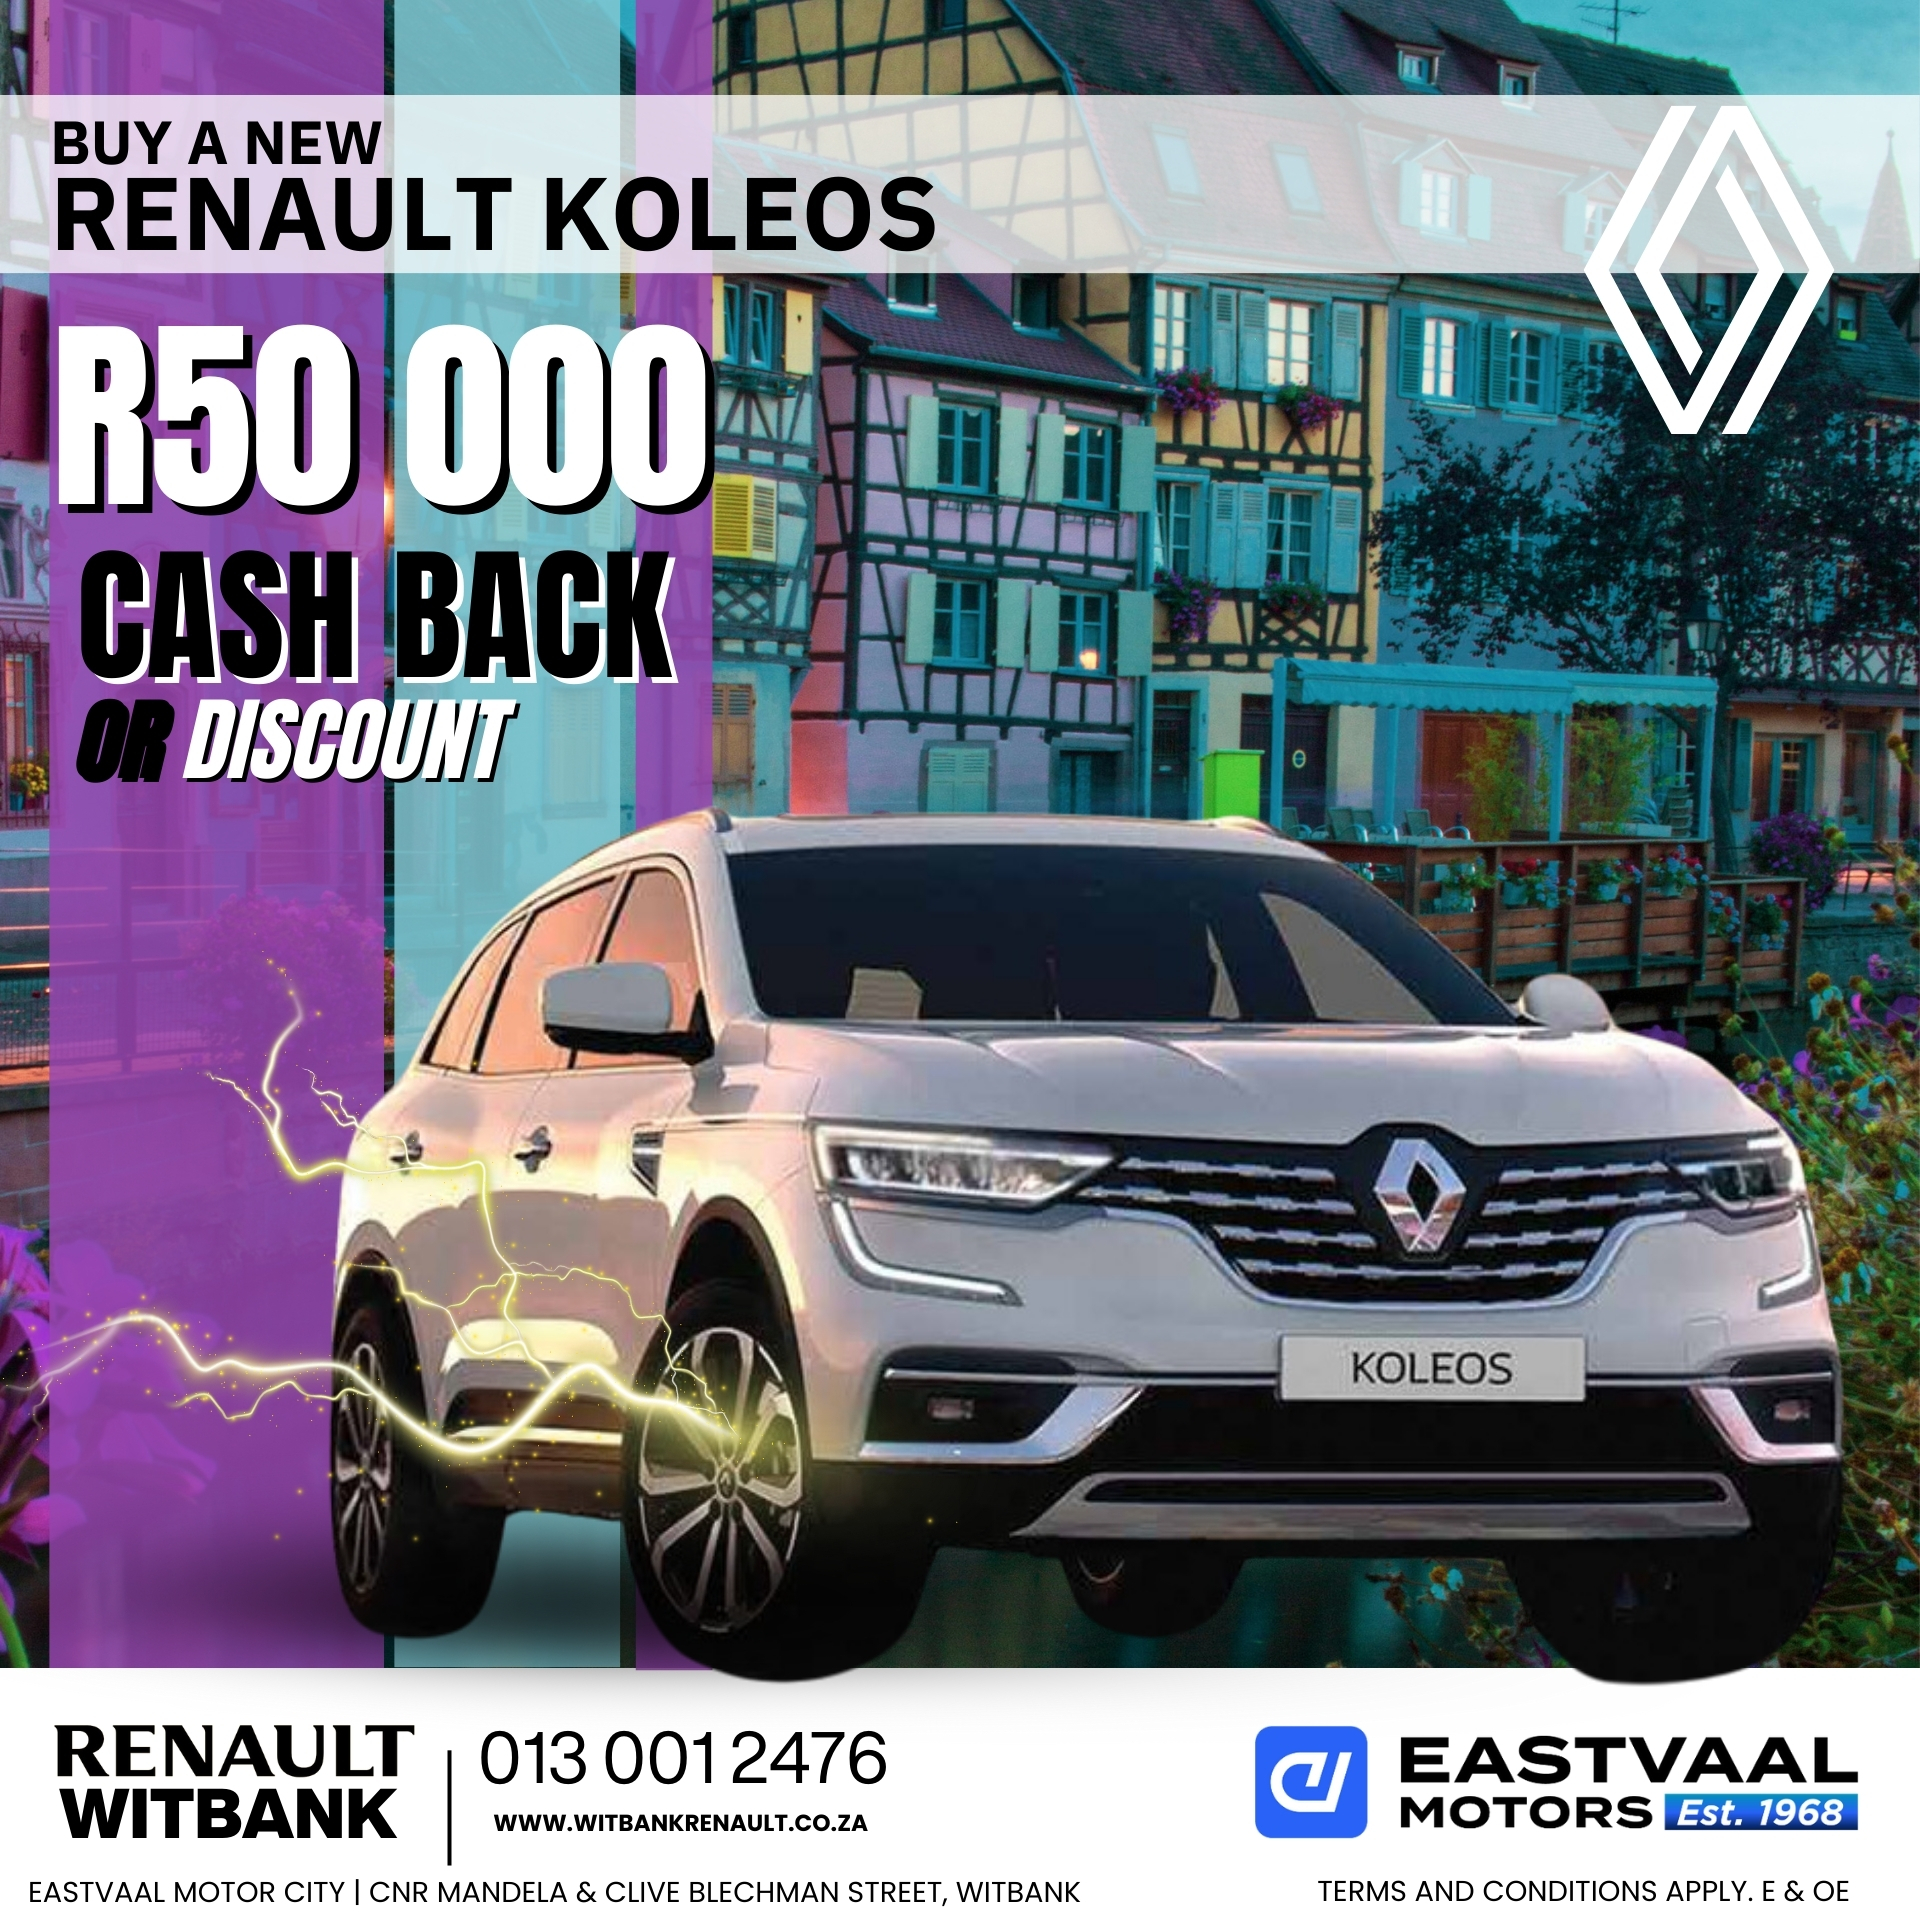 Make this July unforgettable with a new Renault from Eastvaal Motor City. image from 